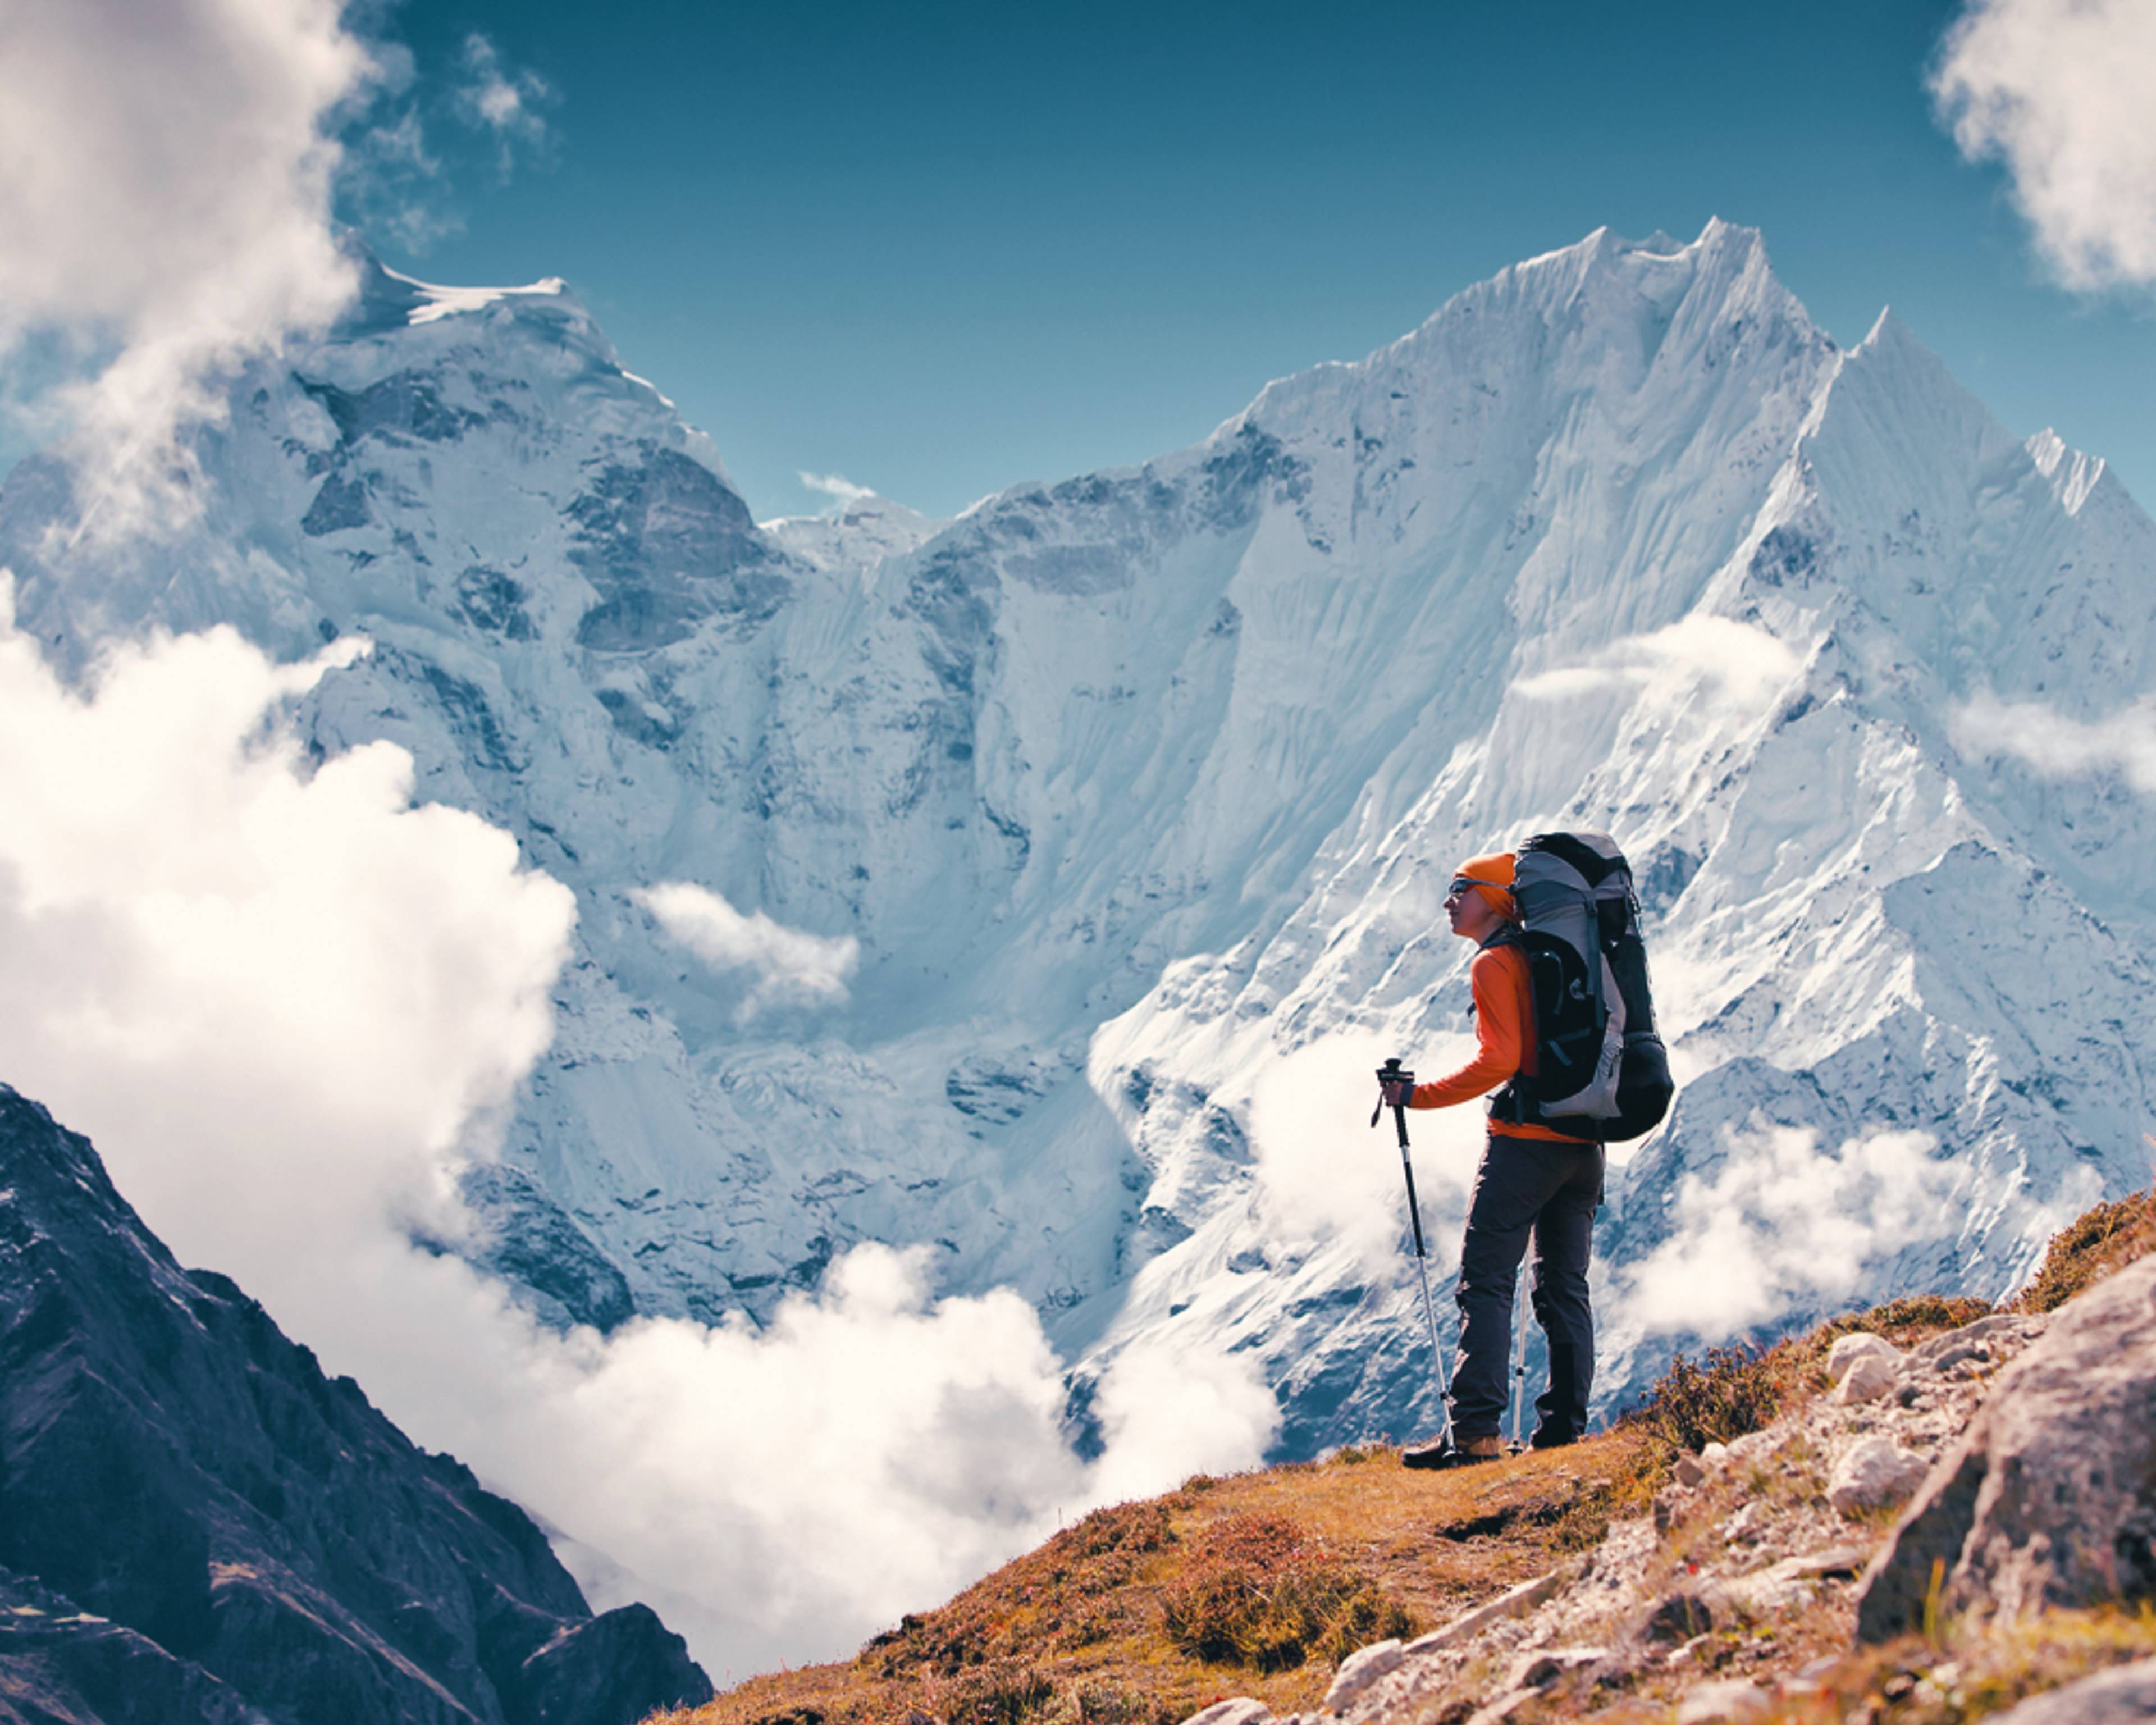 Design your perfect solo trip with a local expert in Nepal